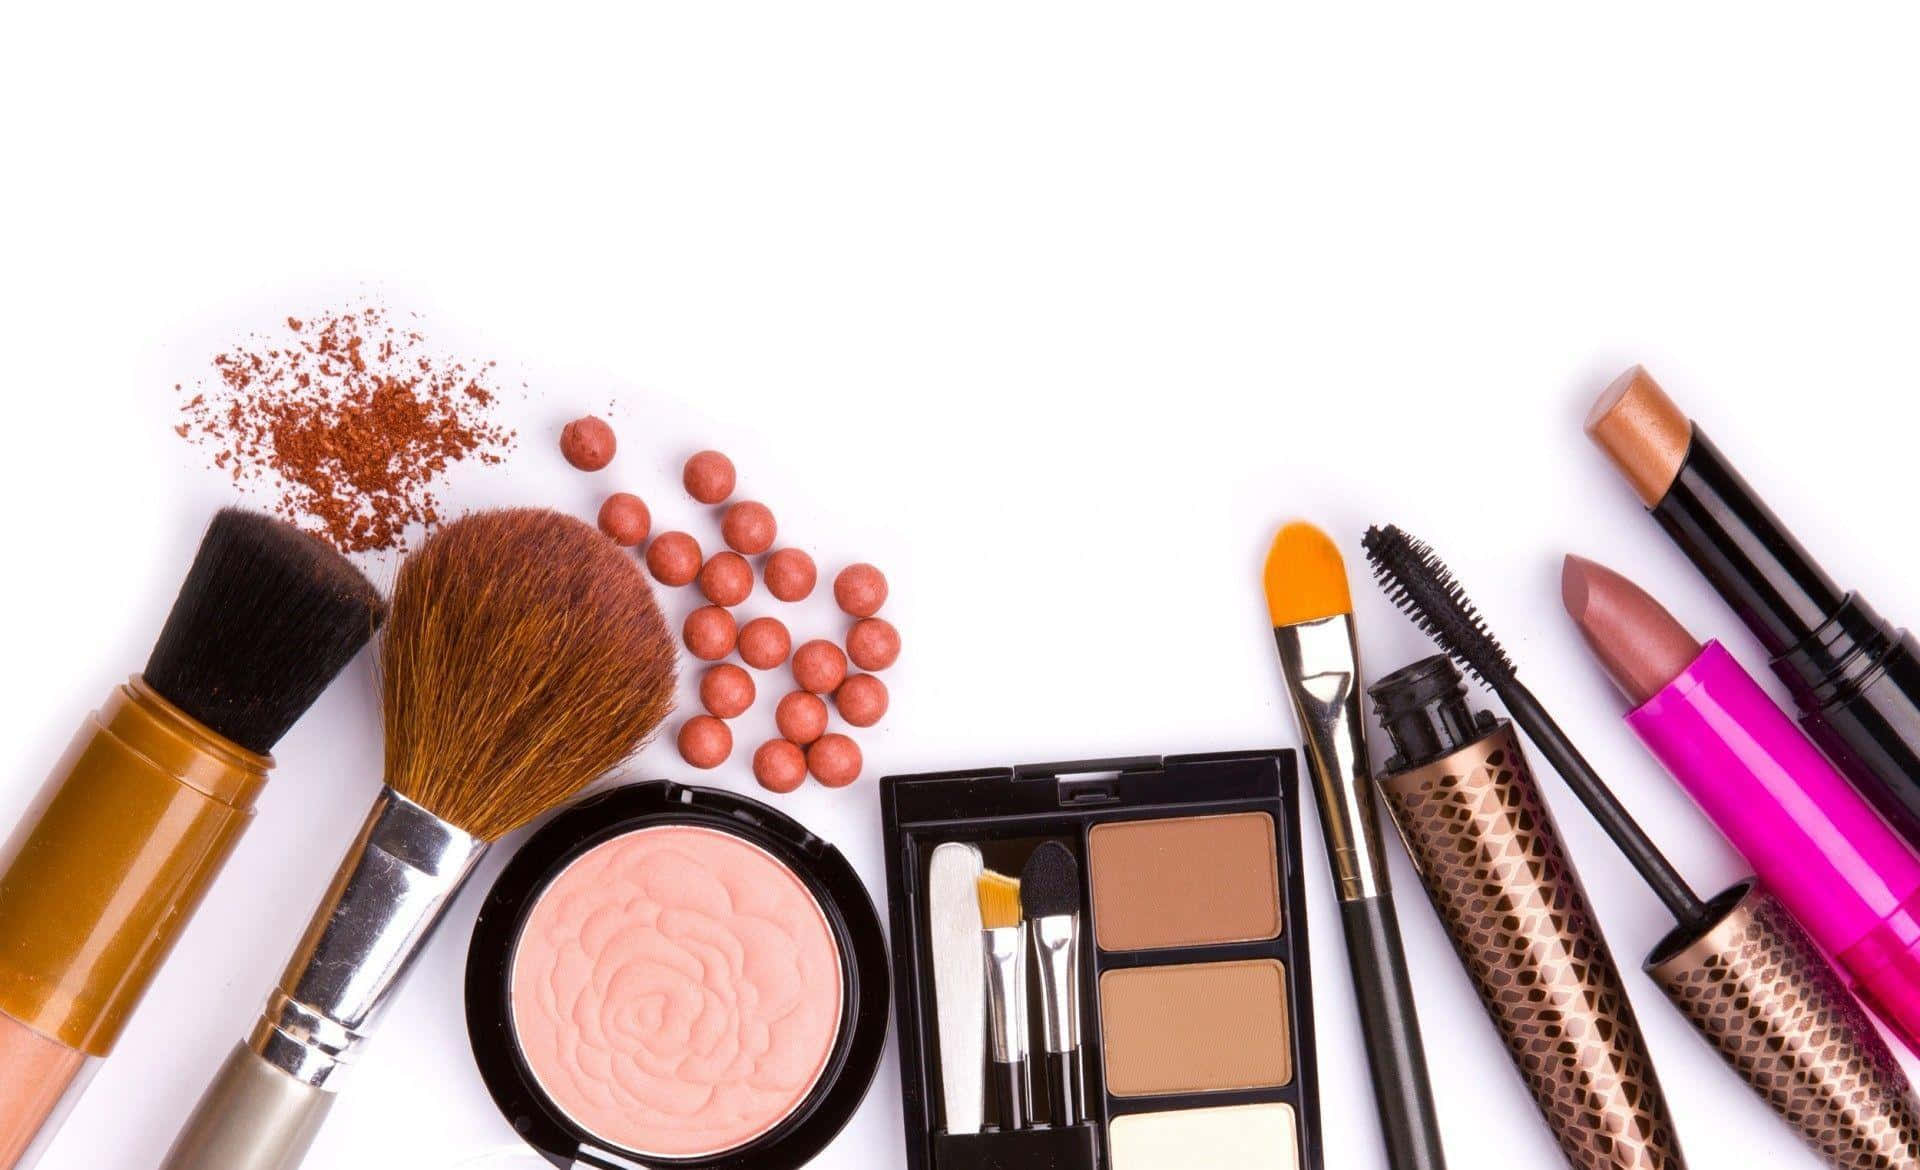 cosmetics and makeup brushes on a white background